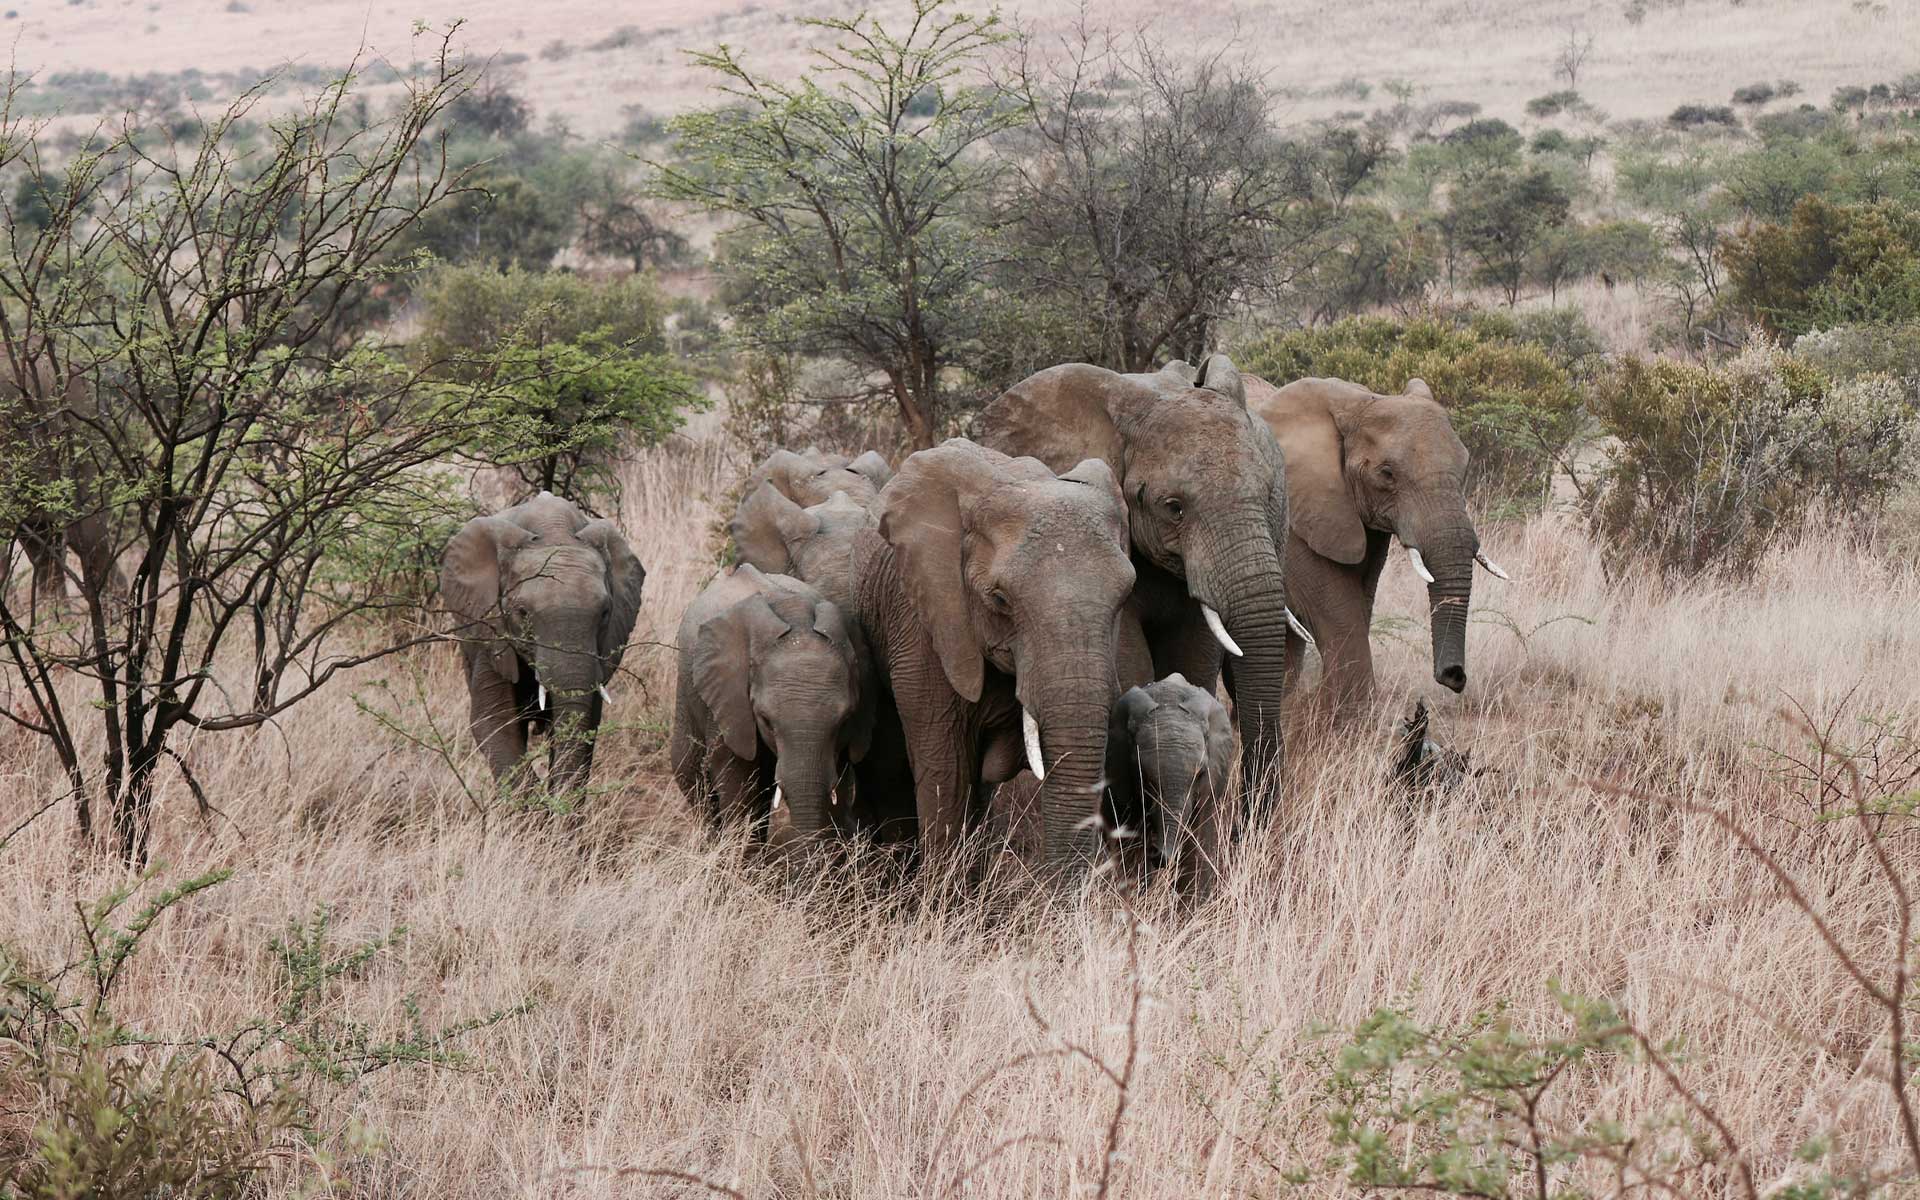 A herd of elephants walking together through a savannah landscape in Tanzania, with one large elephant leading the way.